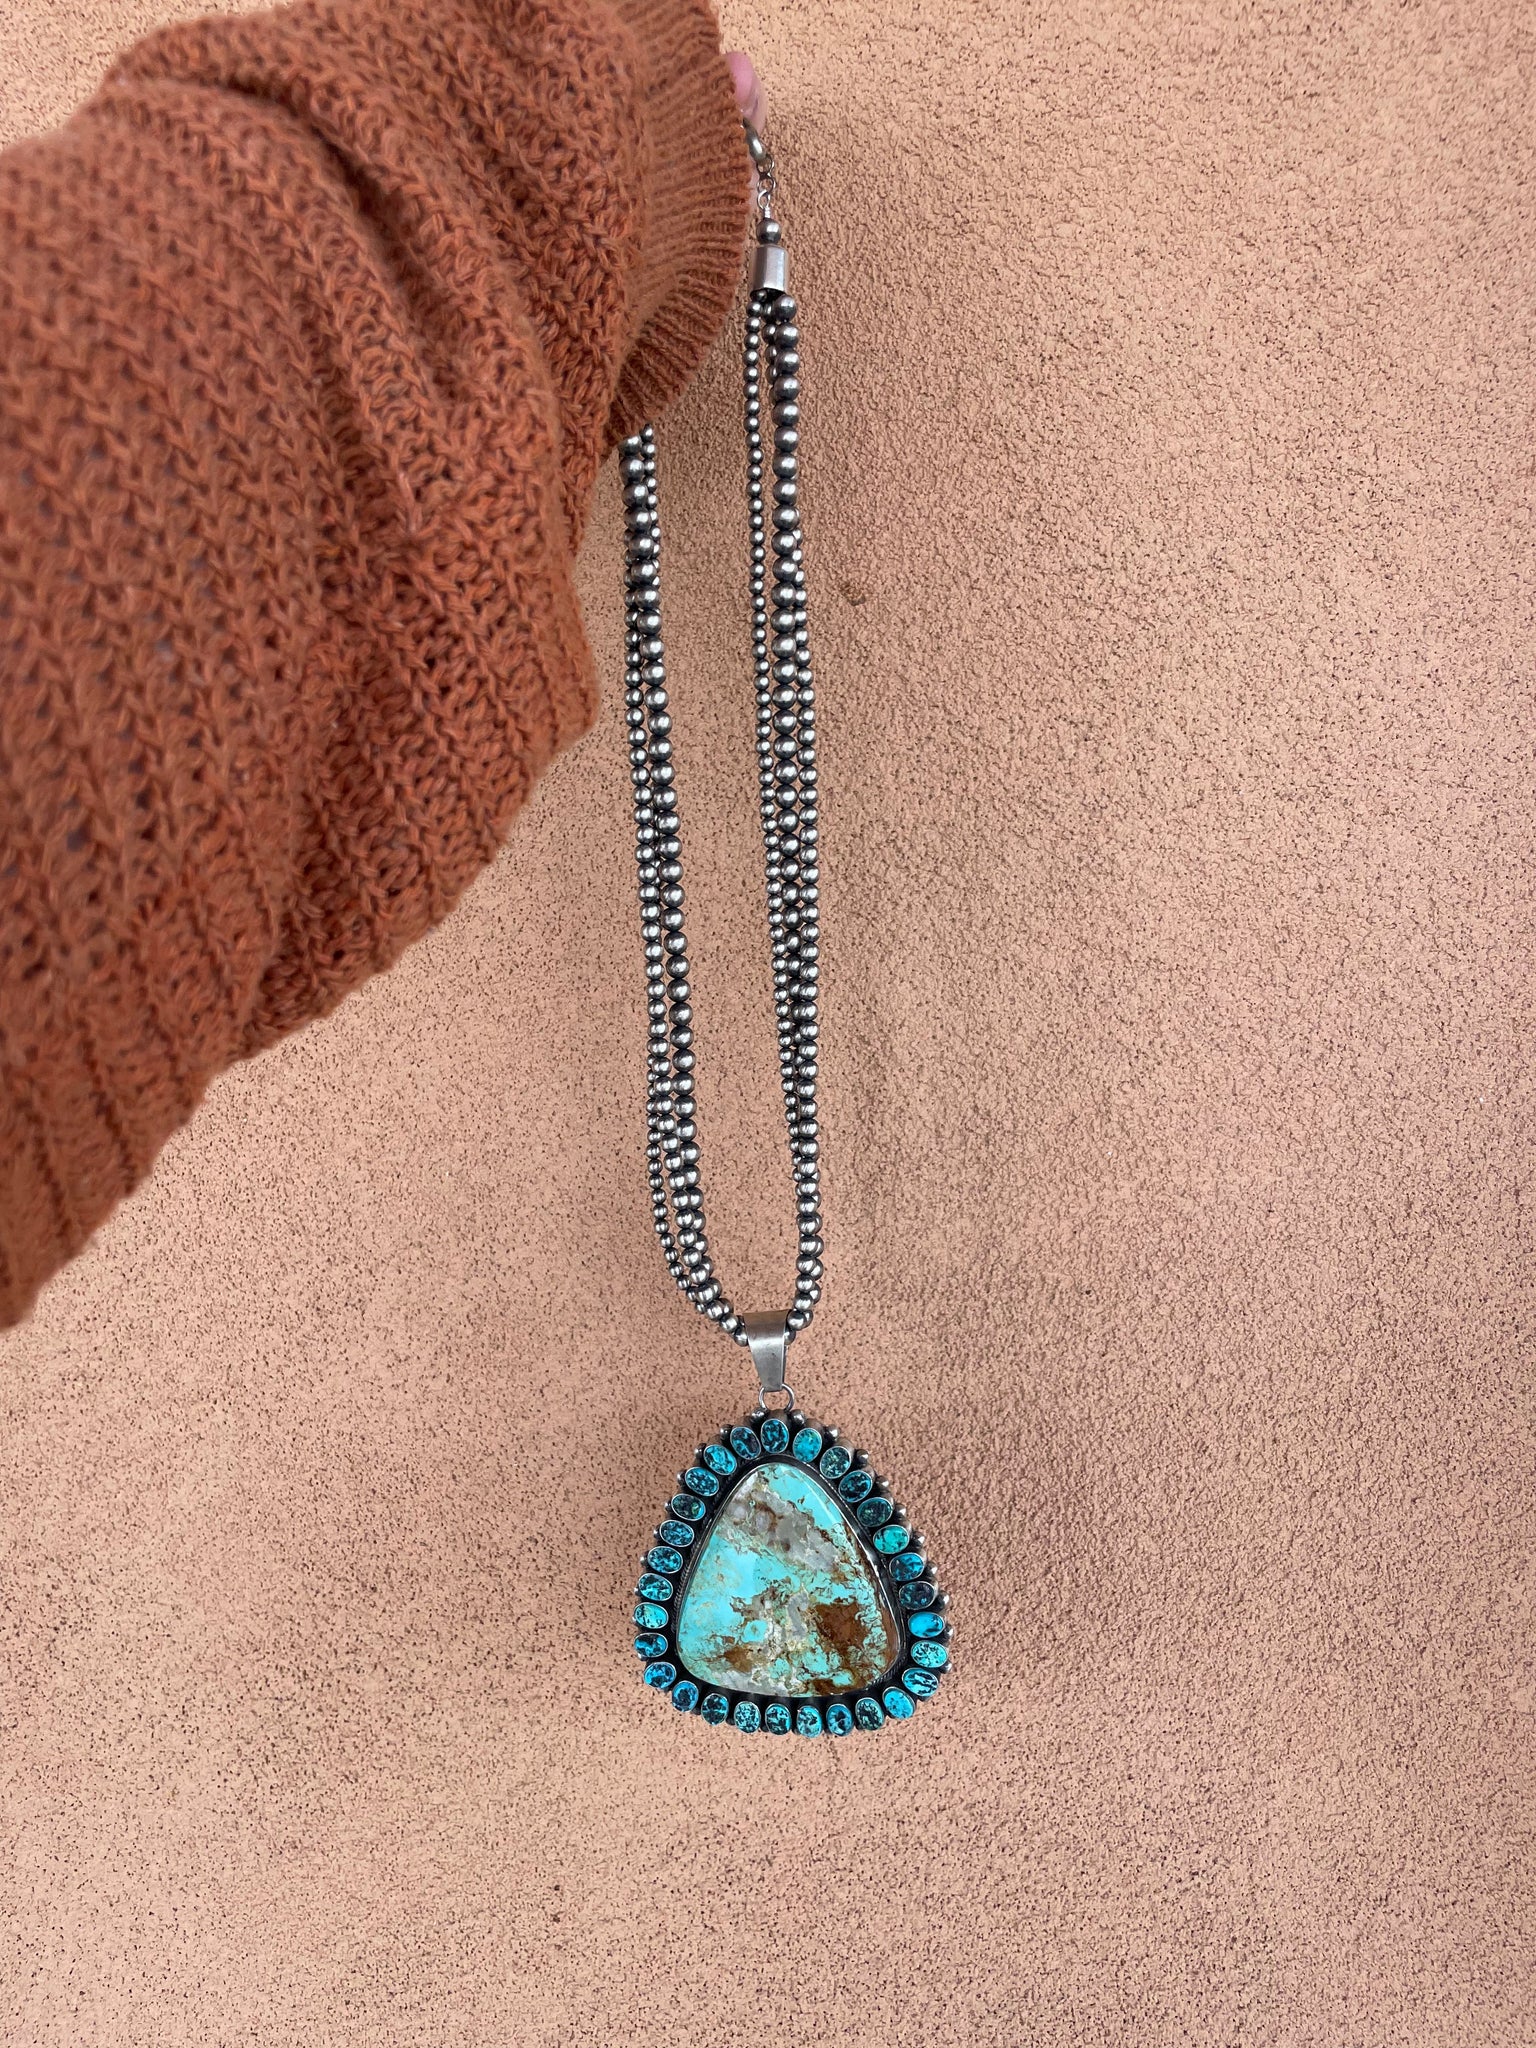 Navajo Turquoise & Spiny Spice Sterling Silver Beaded Necklace 20 inch –  Amanda Radke